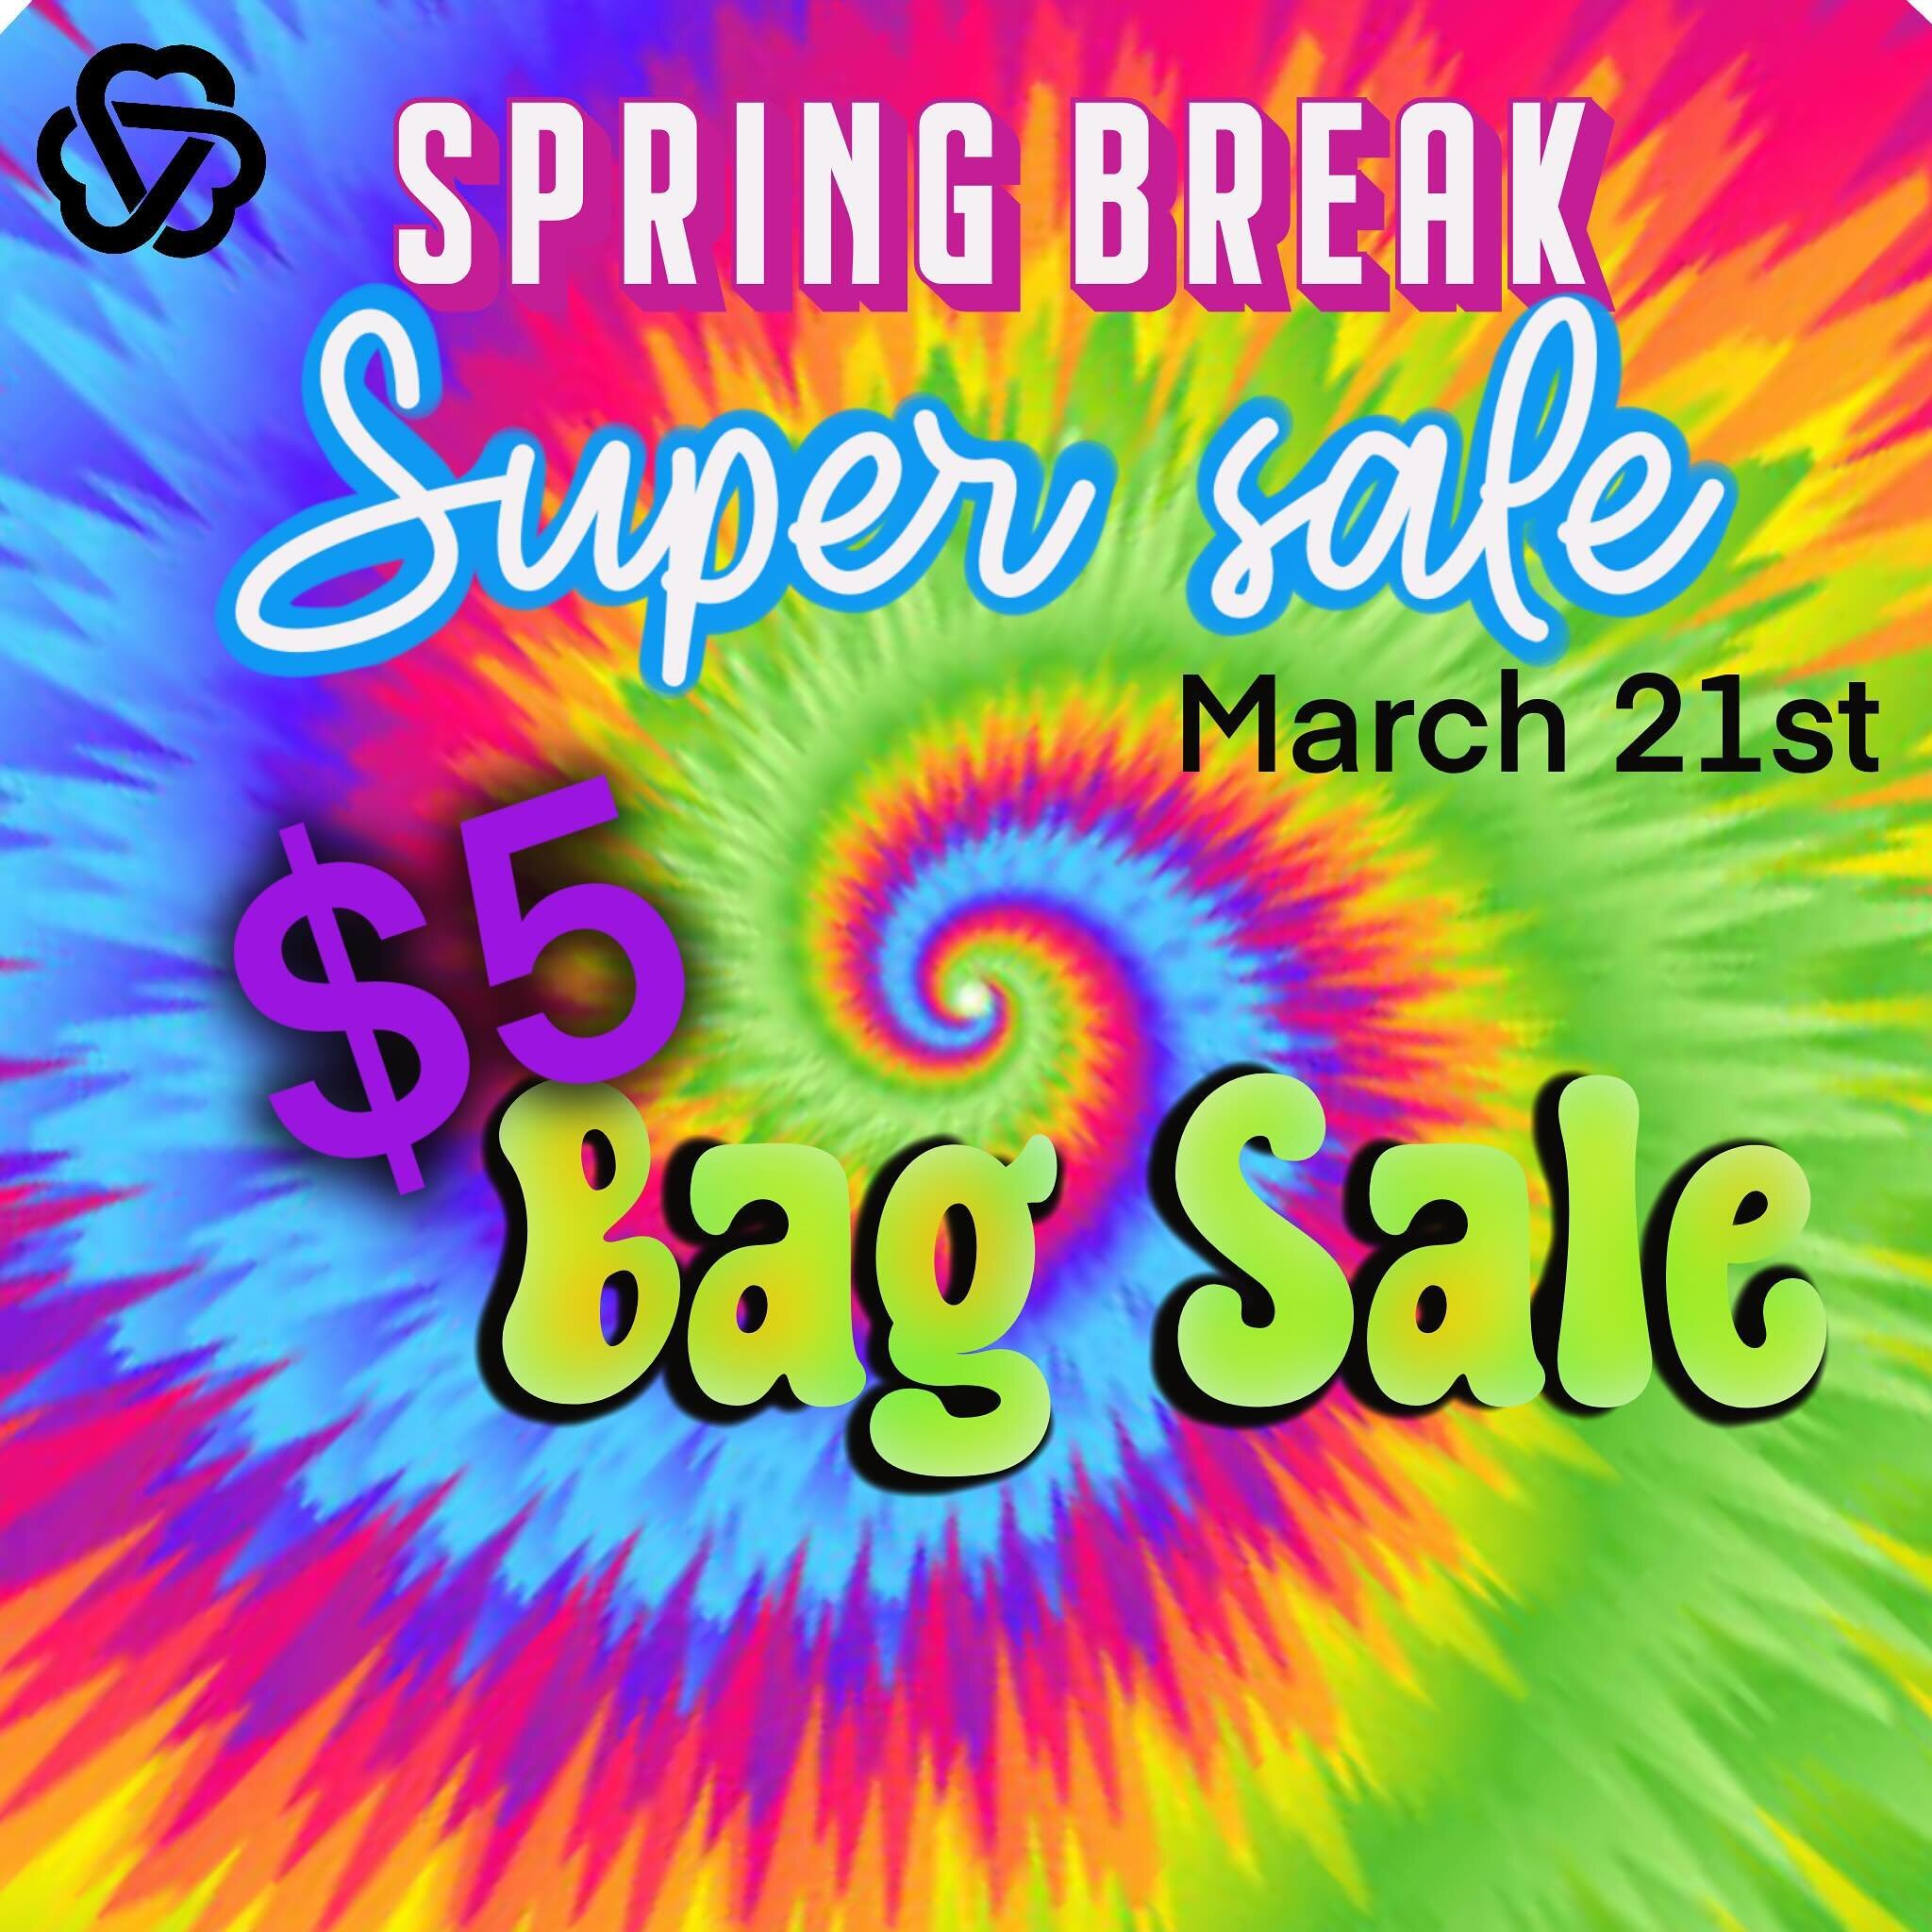 We got another $5 bag sale going on! Come by Muskogee or Tahlequah and stuff a bag full of clothes for five bucks!! 
.
Stores open 9-4p